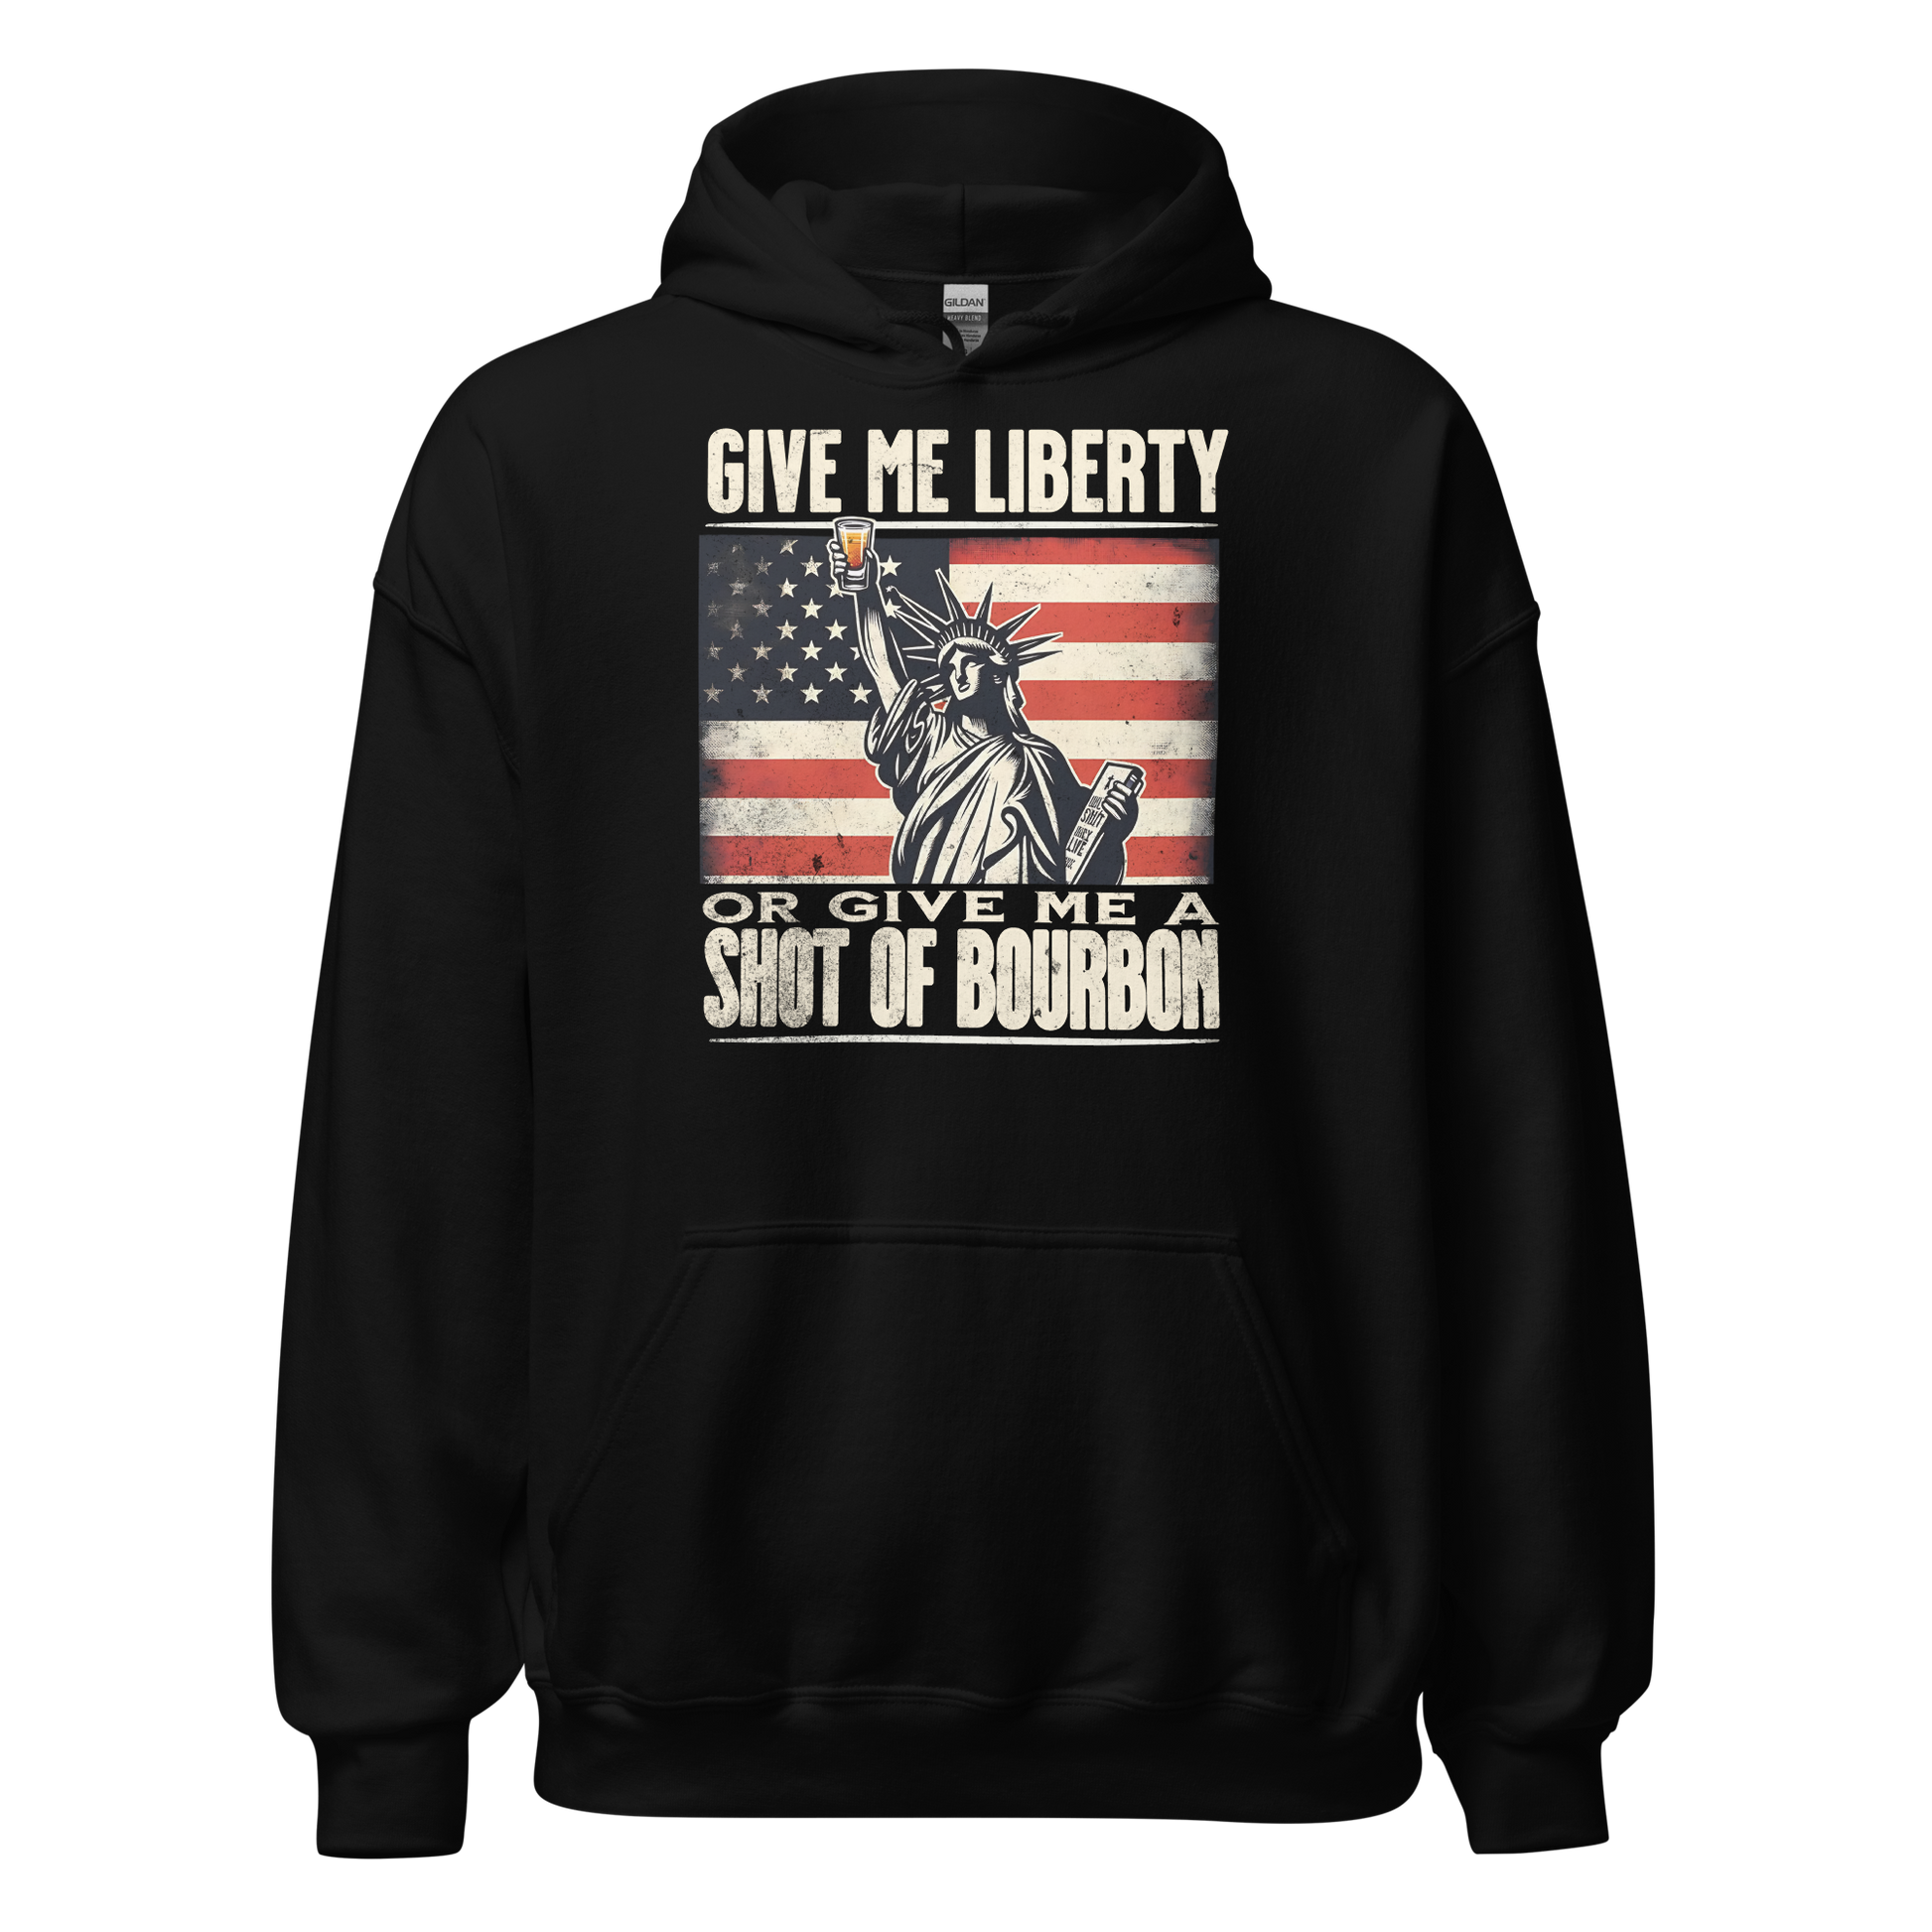 Hoodie with Give Me Liberty or Give Me a Shot of Bourbon text, Statue of Liberty holding a shot glass, and distressed American flag background. Perfect for 4th of July.